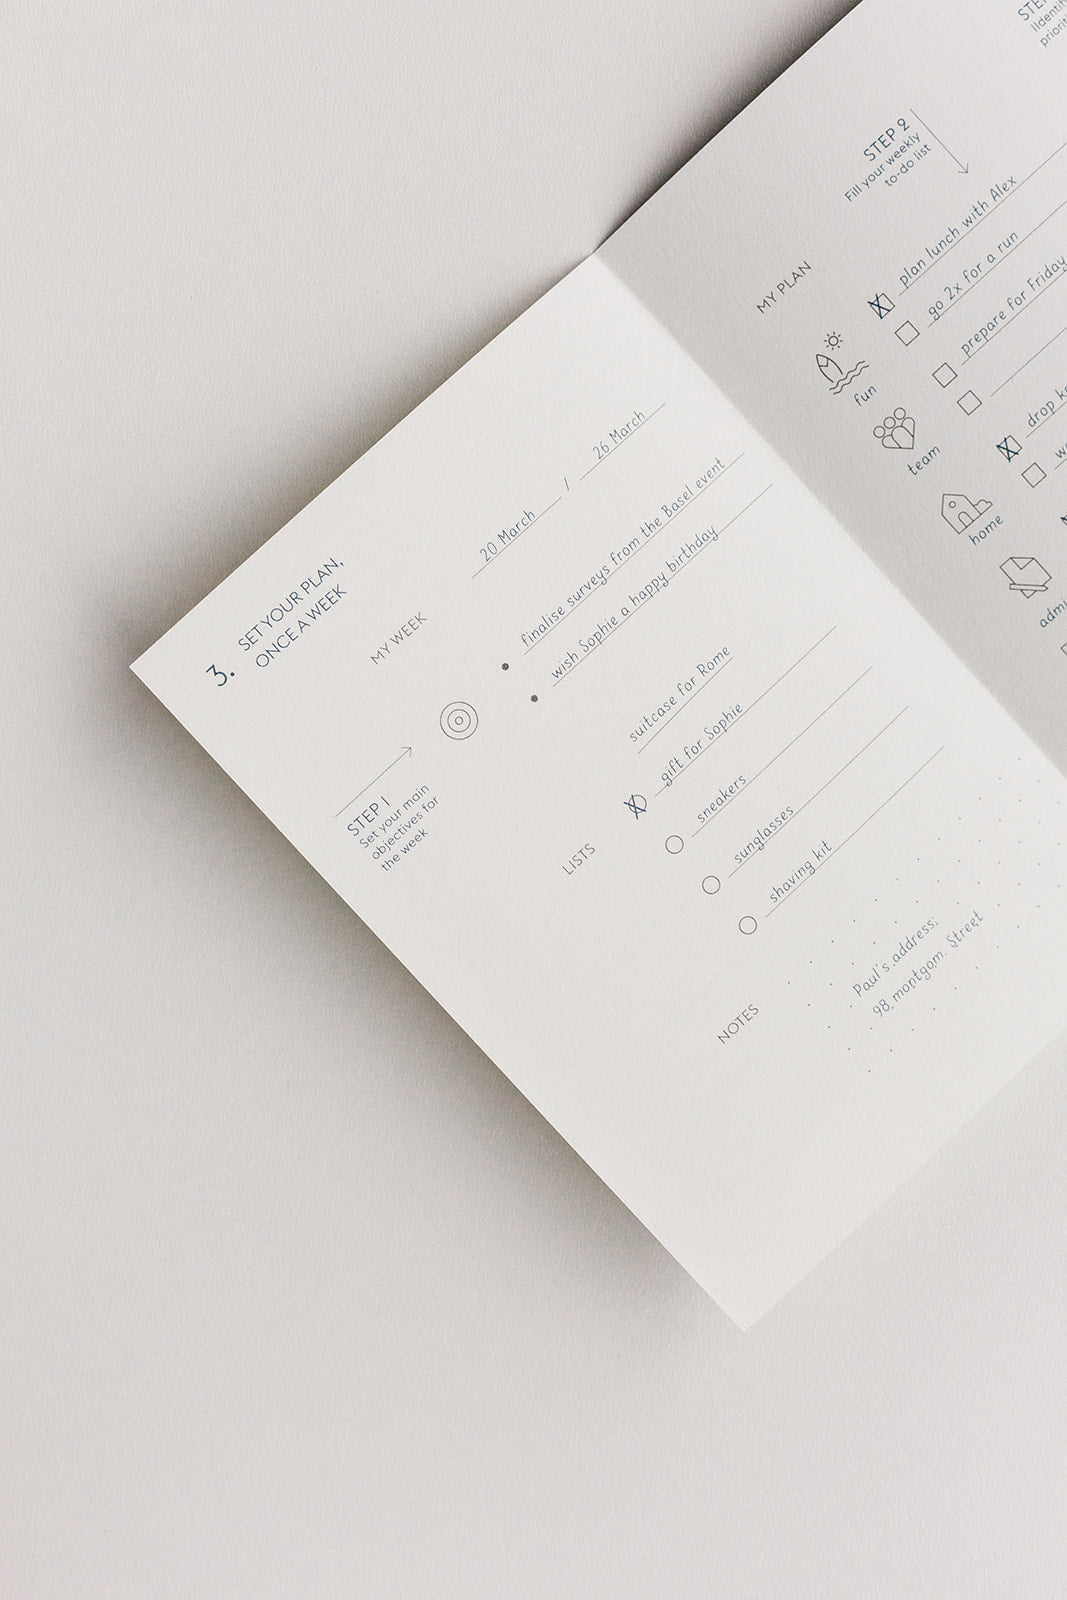 Daily undated planner